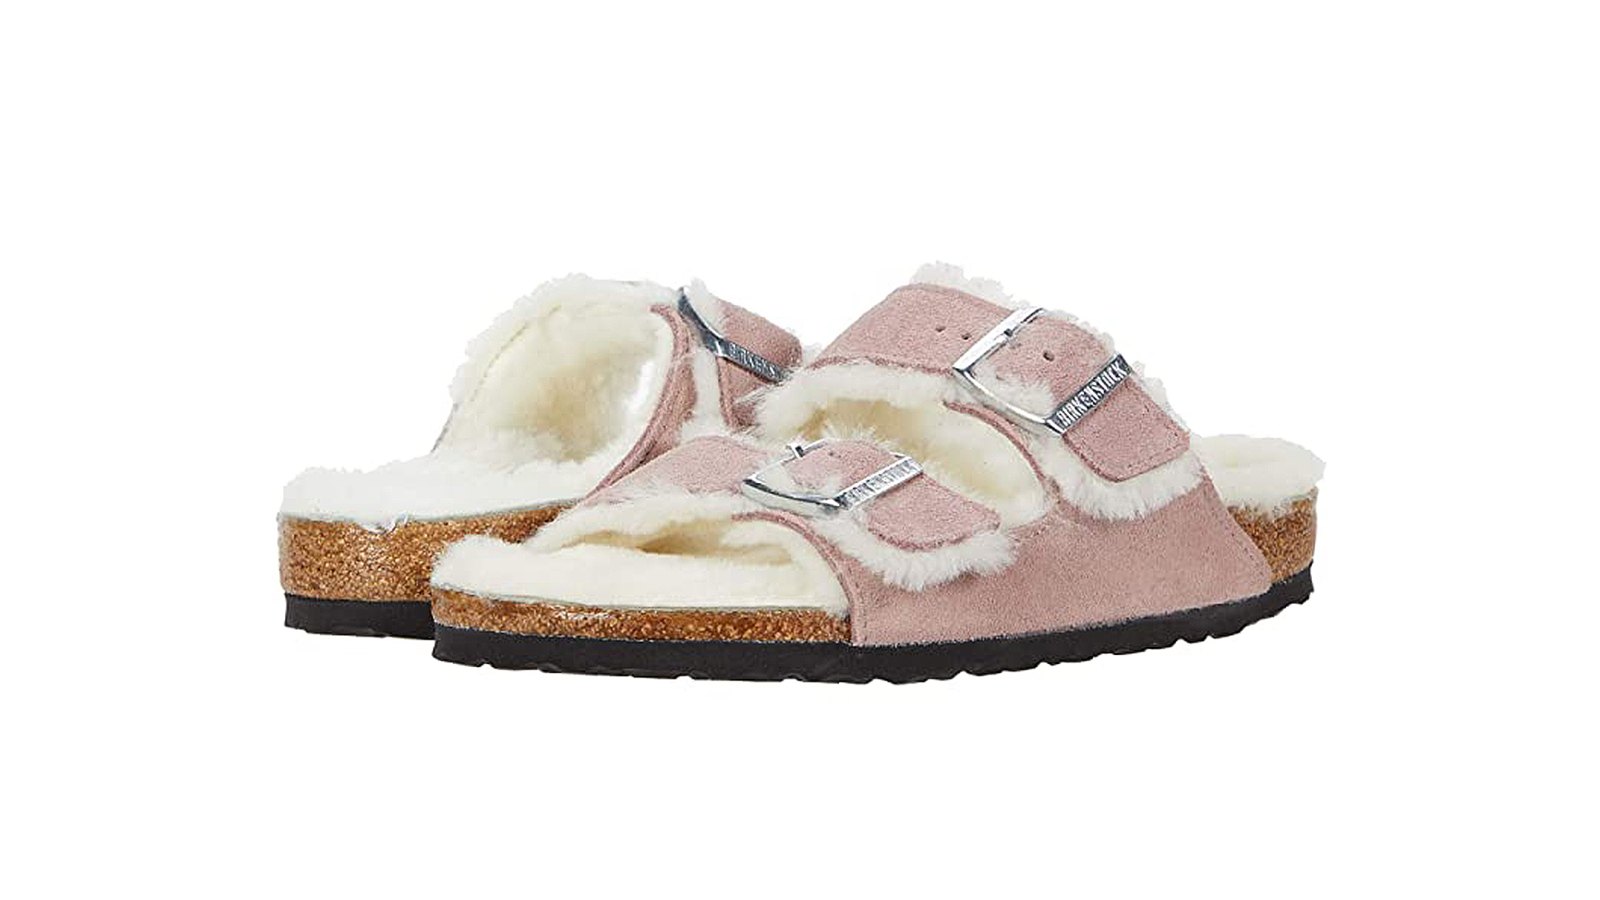 Birkenstock Shearling-Lined Sandals Are So Cozy and Comfortable